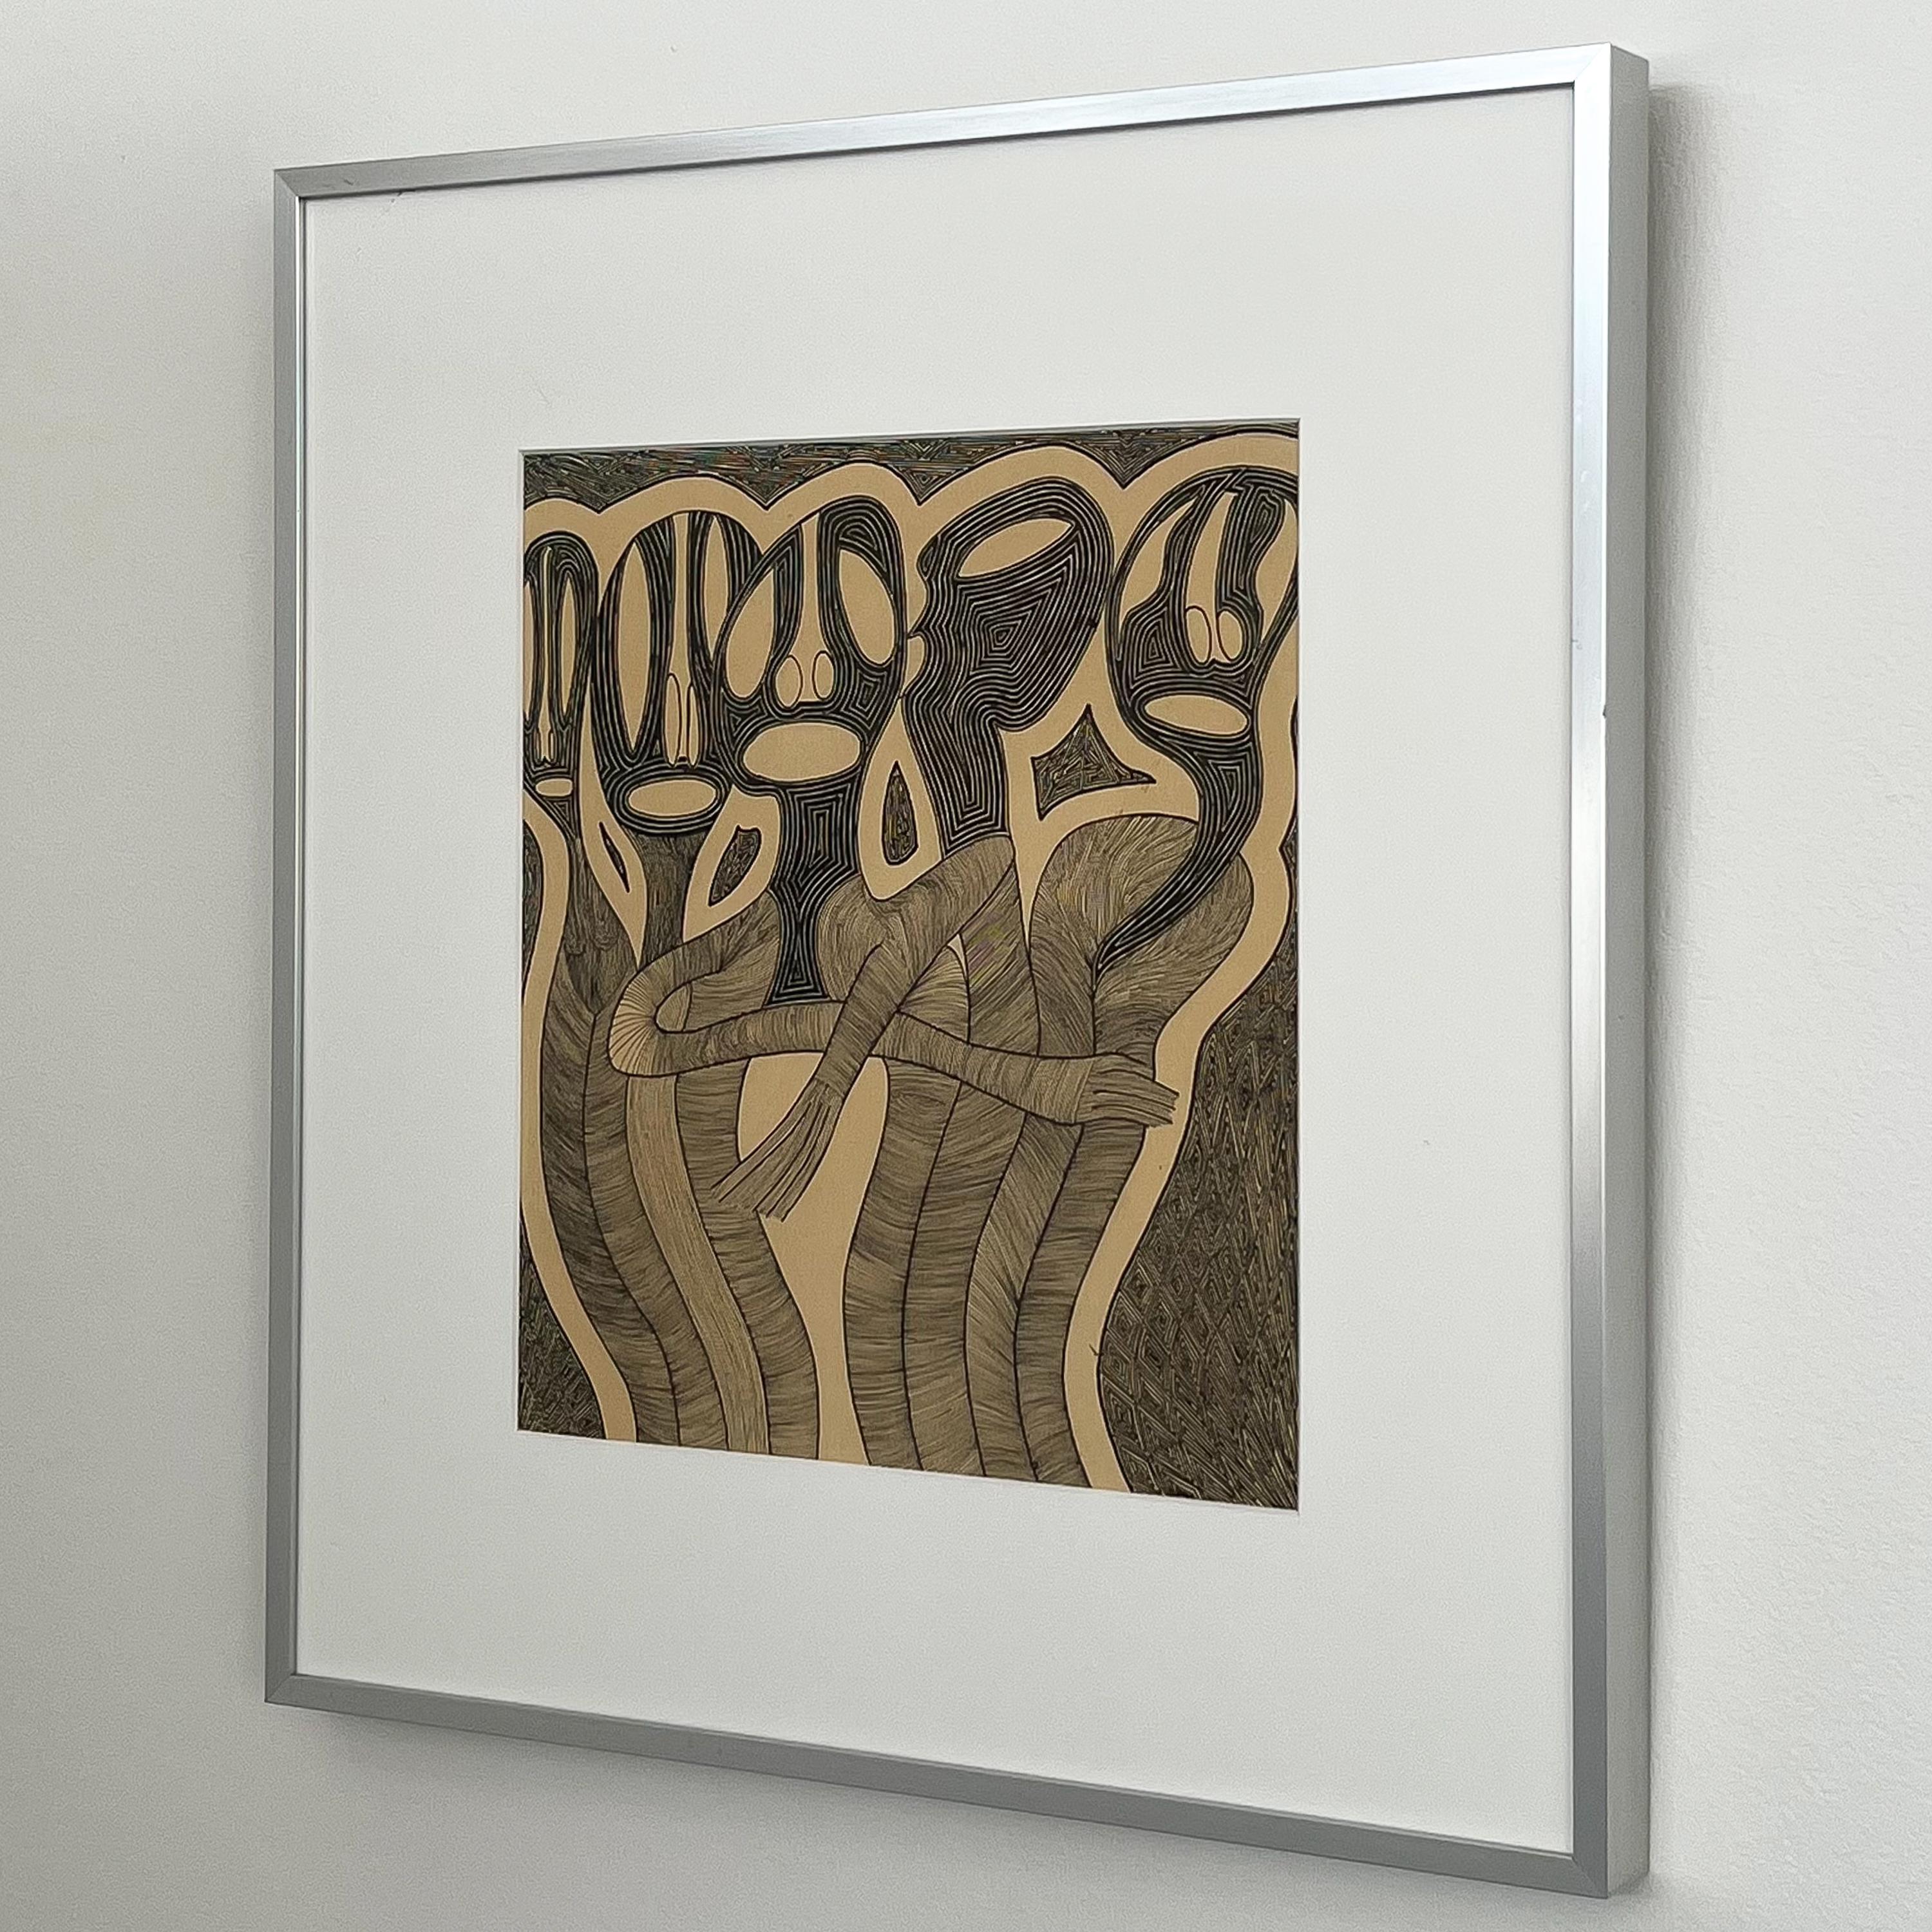 Pierre-Francois Vaysse framed modern abstract drawing, Belgium circa 1970. Intricate ink drawing on paper of abstract / surreal anthropomorphic figures. Black ink on beige background. Newly matted in white within the original aluminum frame behind